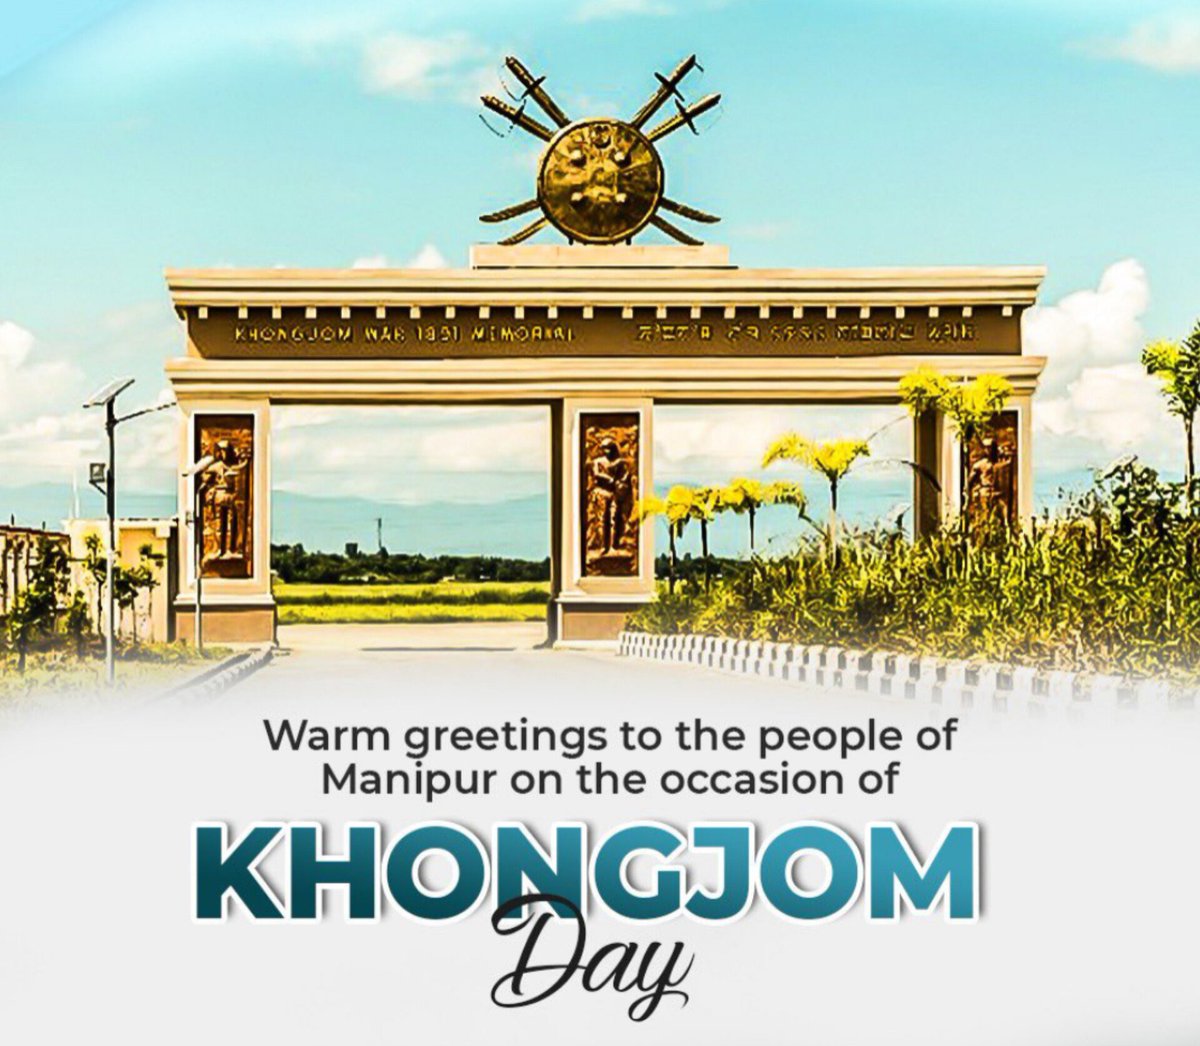 Warm greetings on the occasion of Khongjom day 🙏